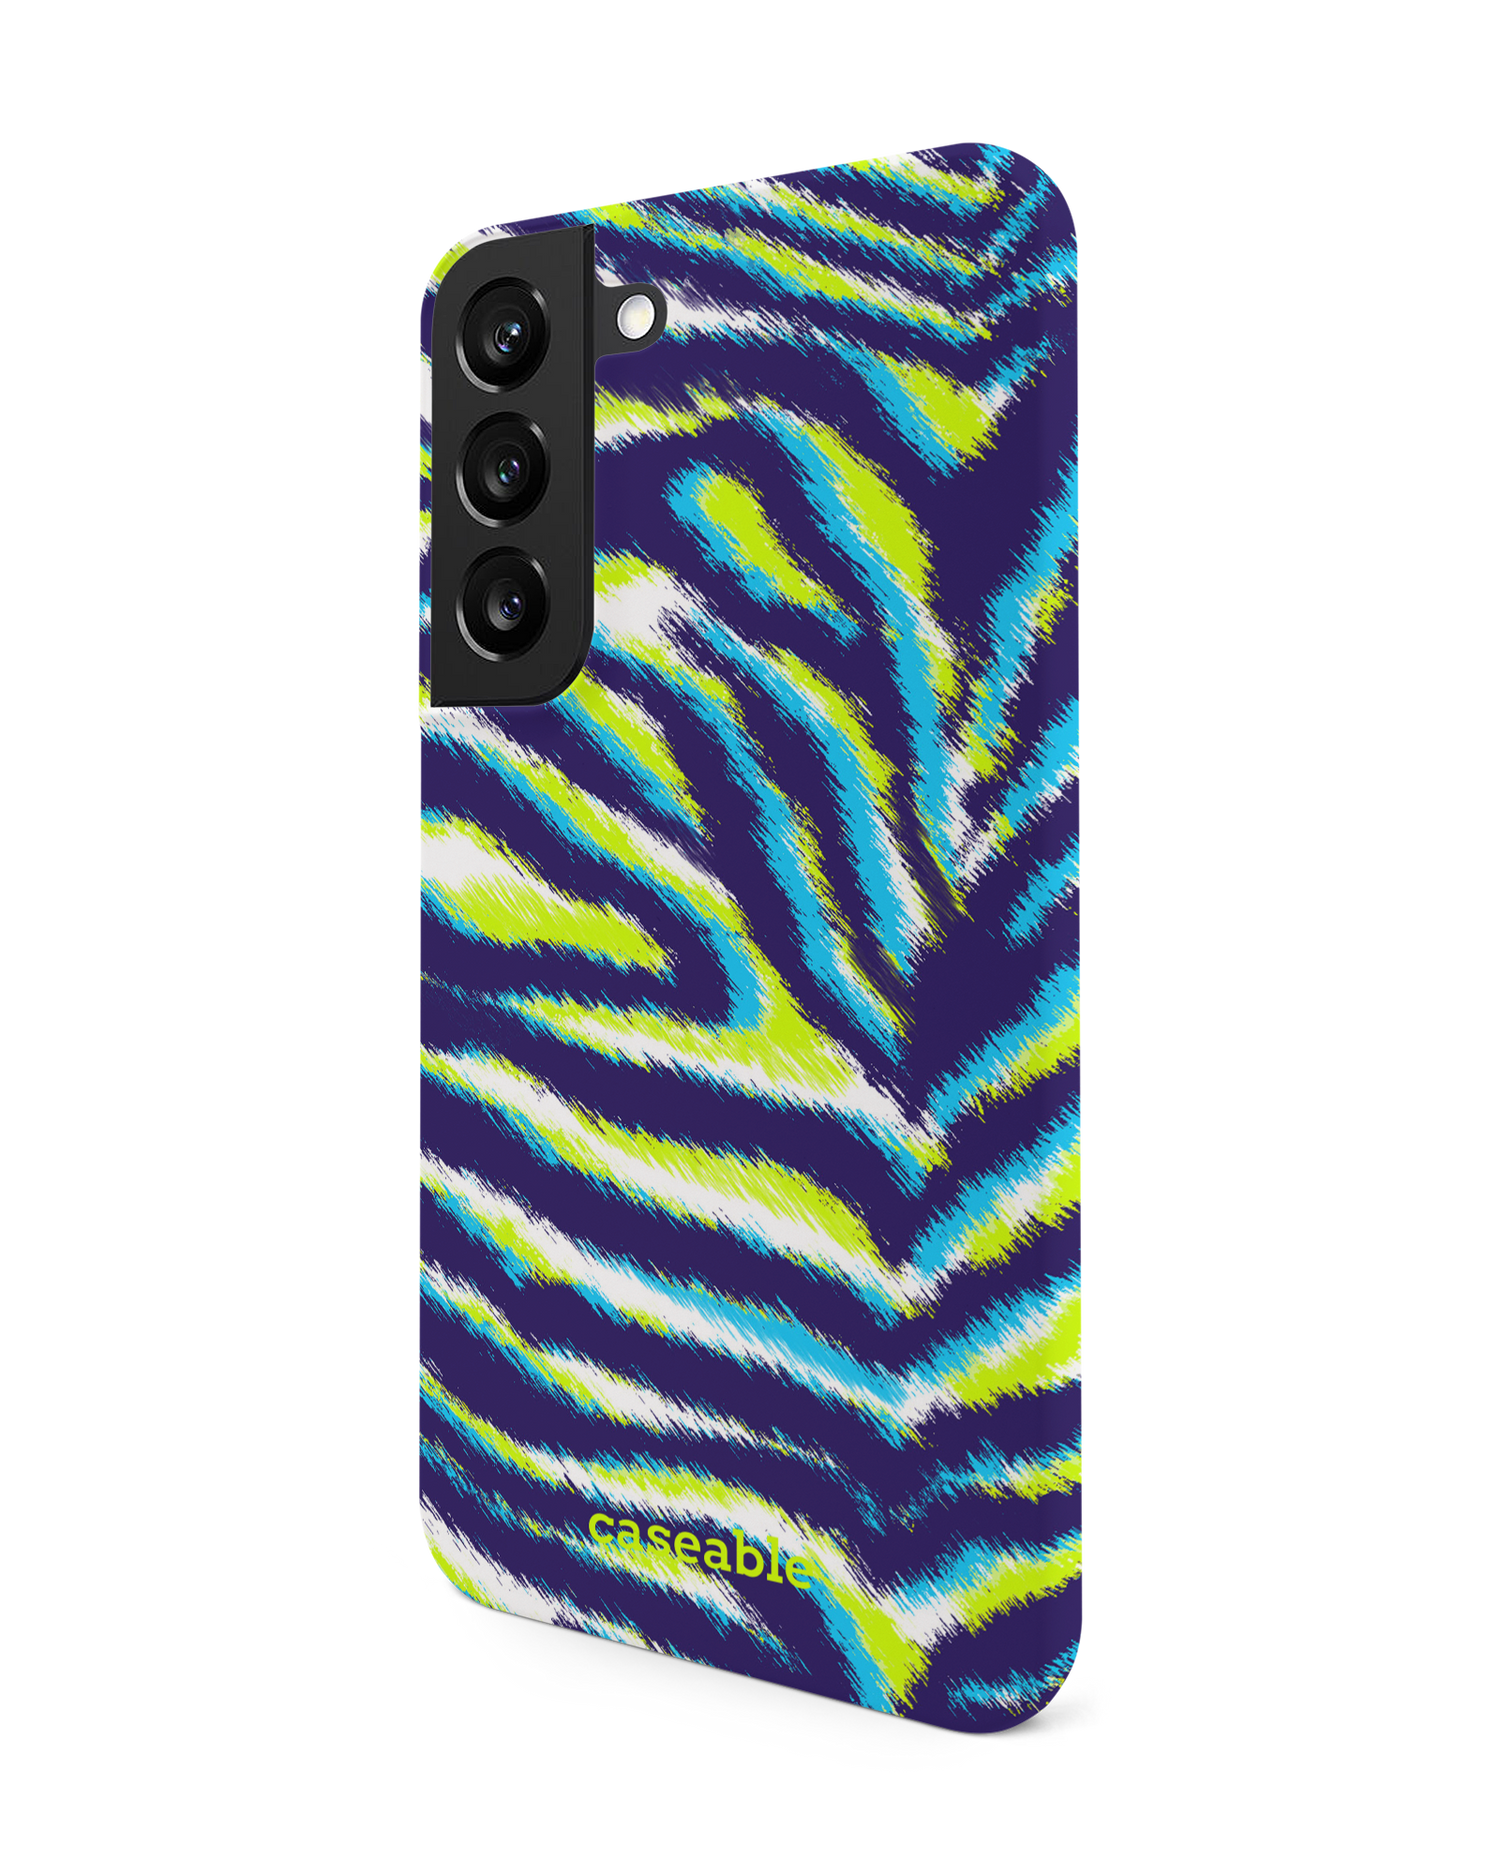 Neon Zebra Hard Shell Phone Case Samsung Galaxy S22 5G: View from the right side